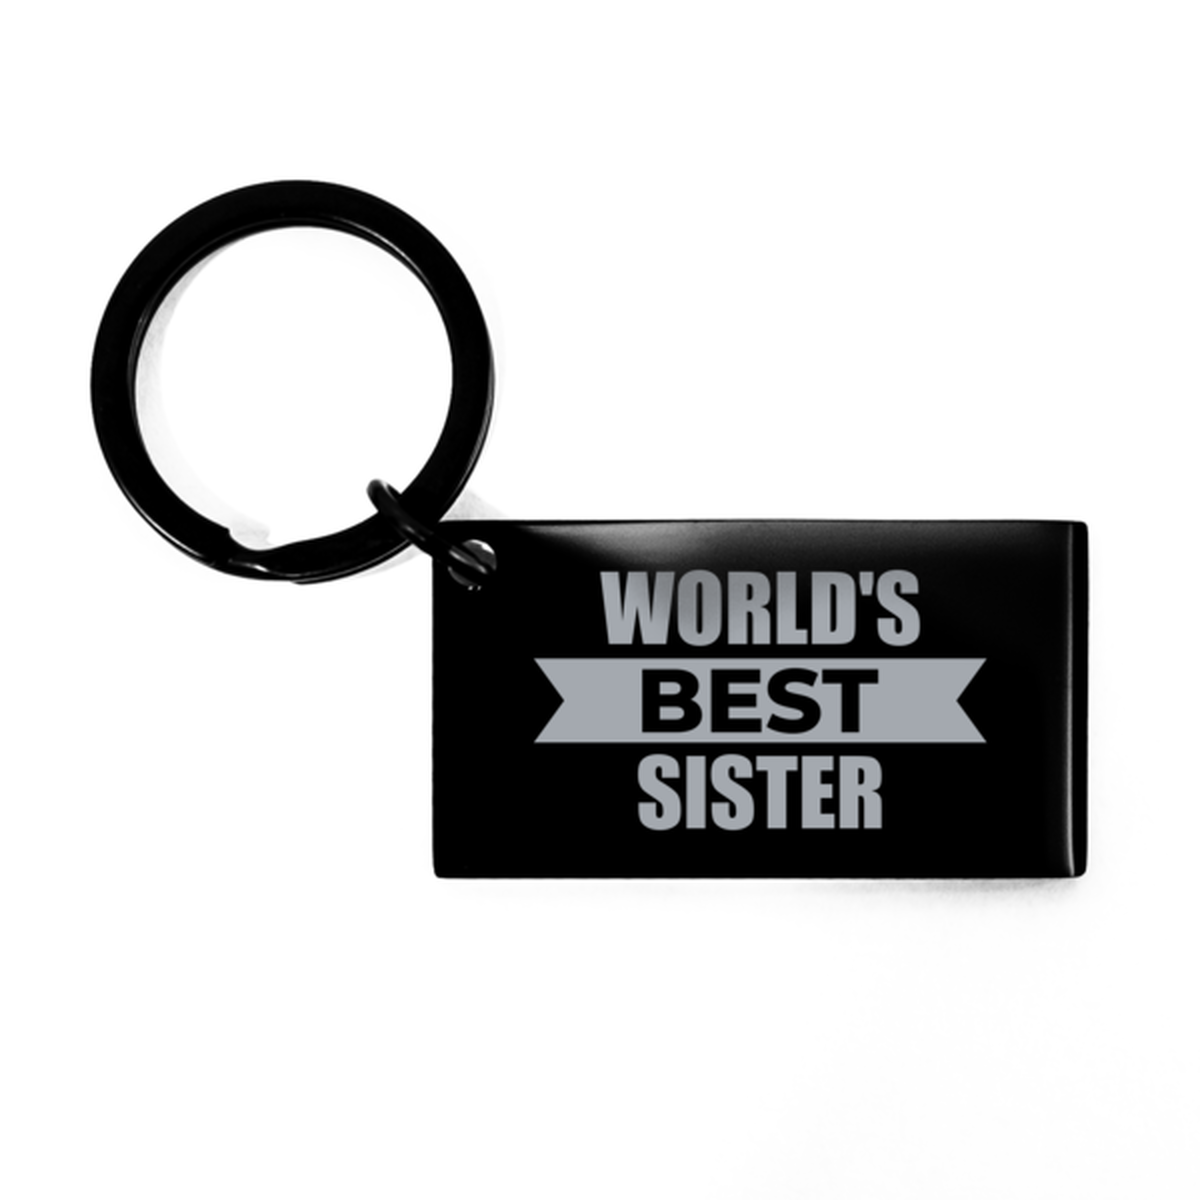 Worlds Best Sister Gifts, Funny Black Engraved Keychain For Sister, Birthday Presents For Women